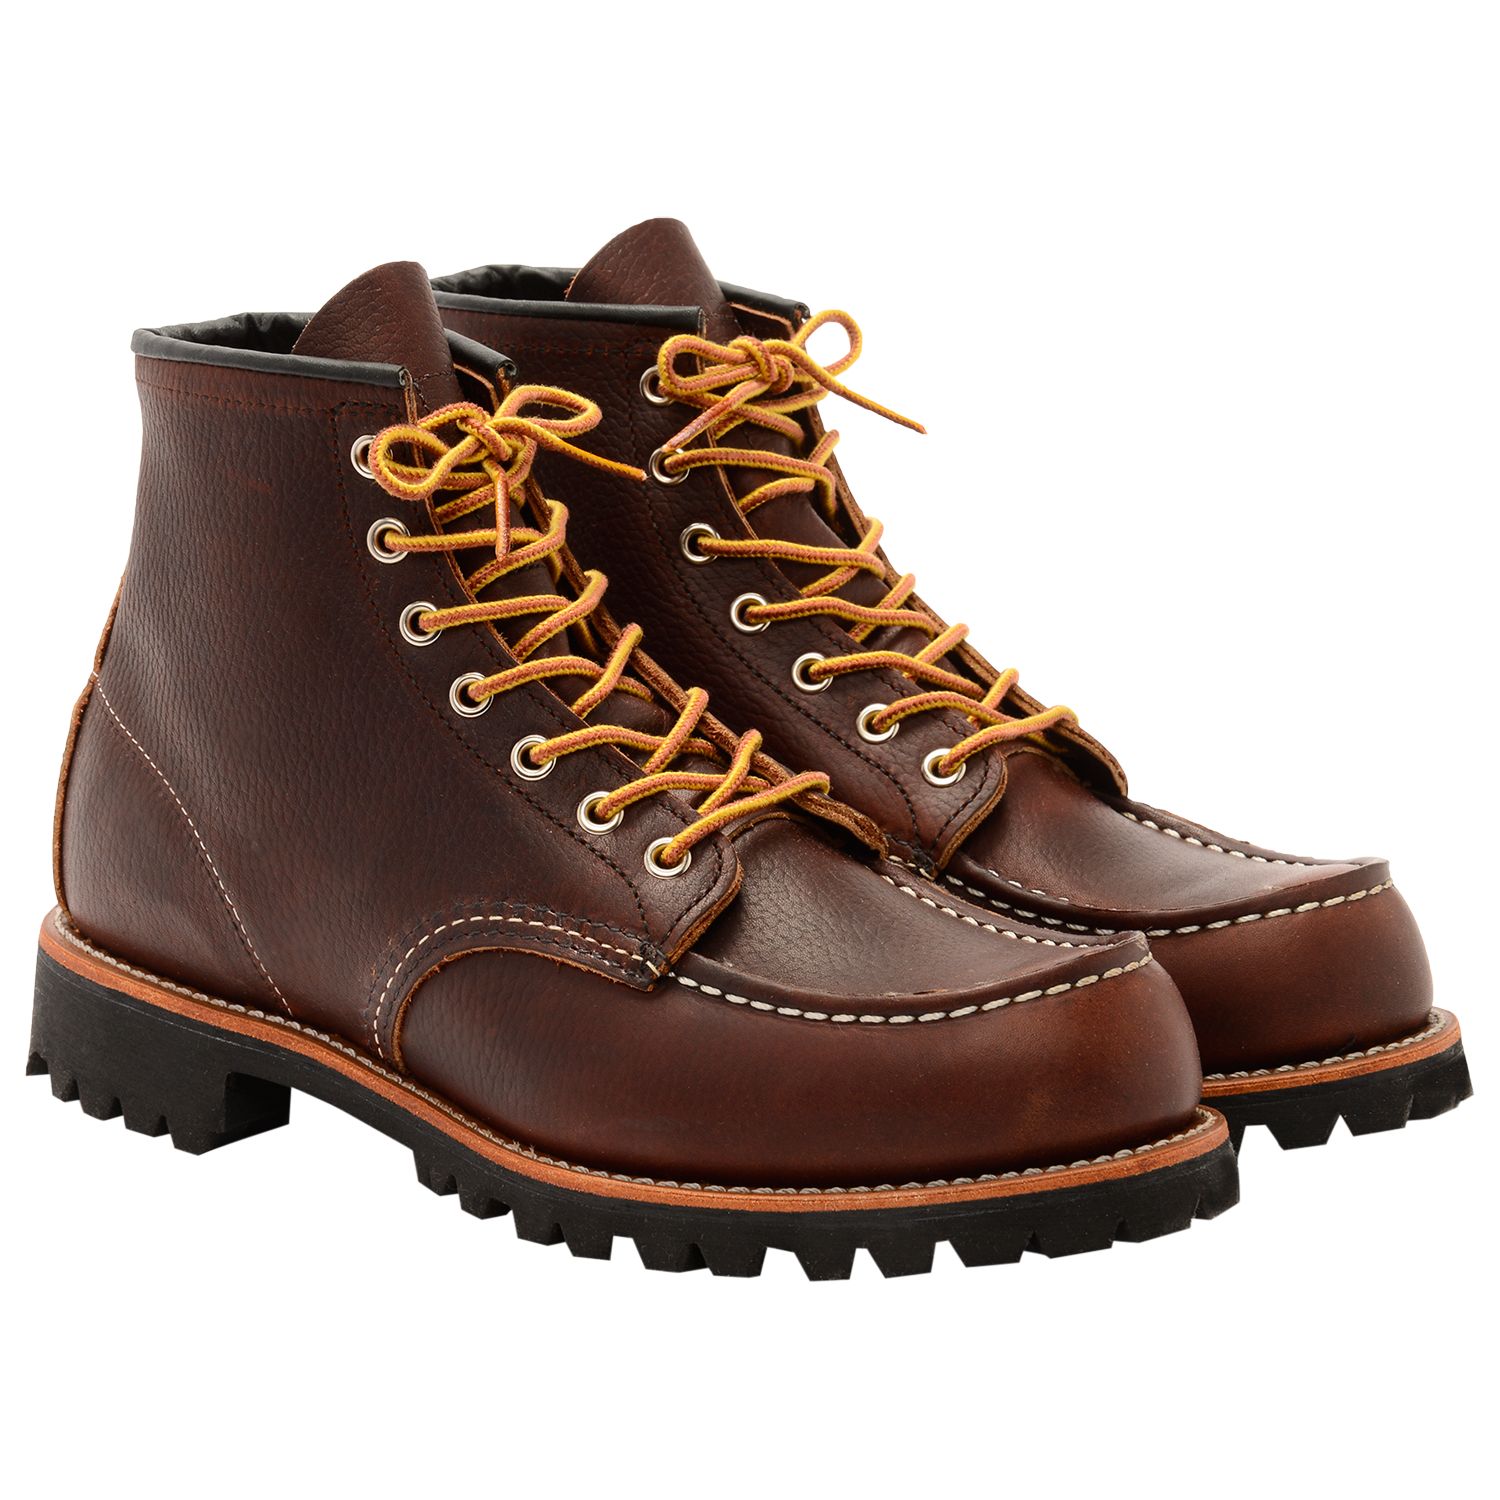 Red Wing 8146 Roughneck Boots, Briar